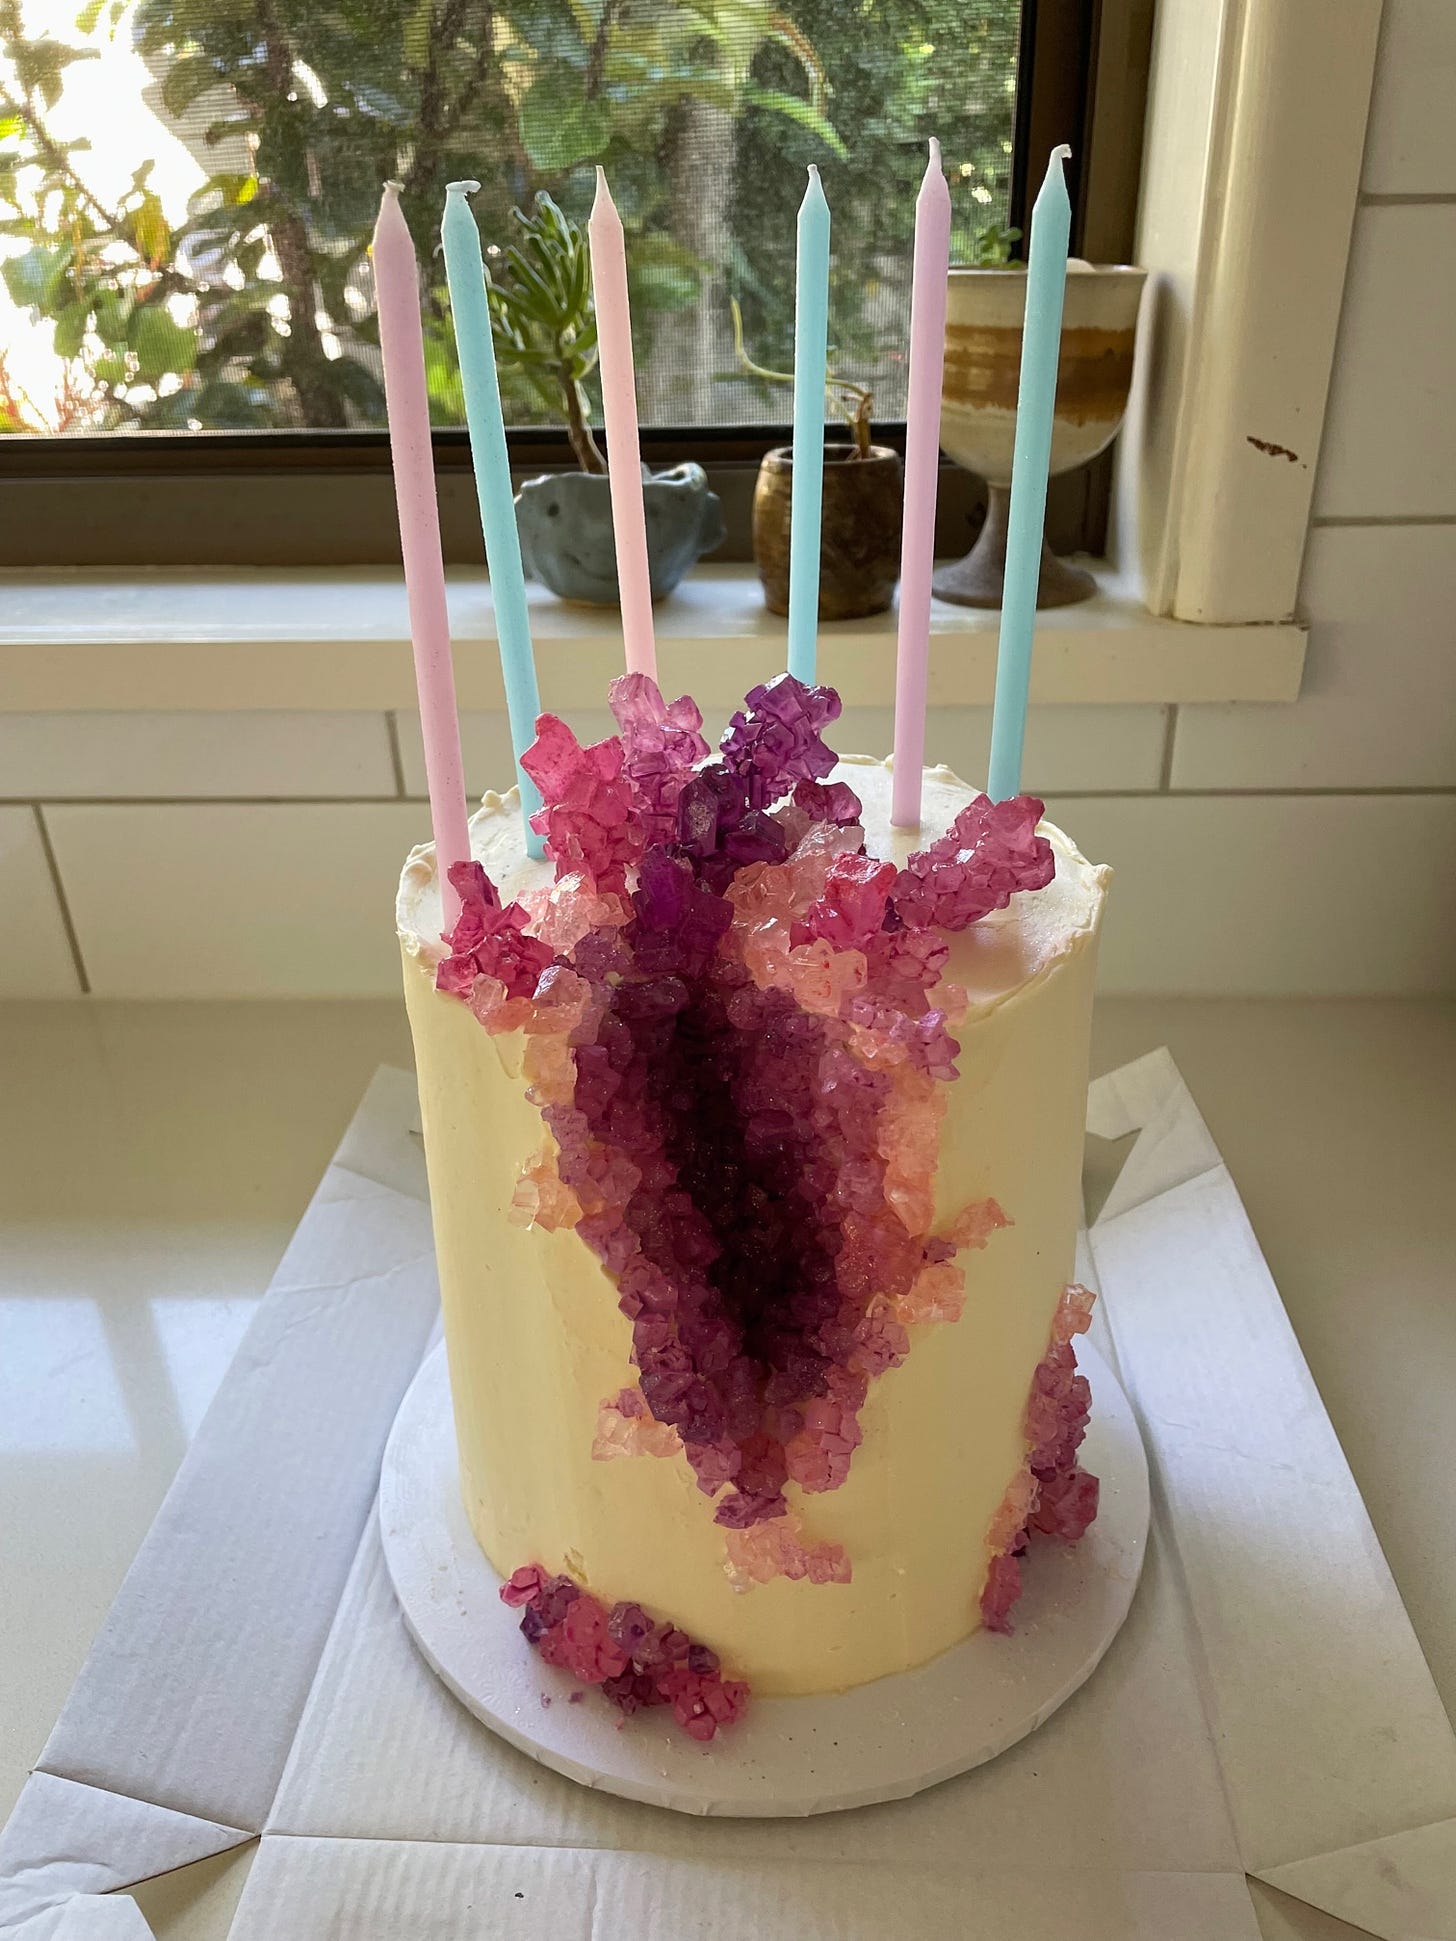 A photo of a geode cake, with purple sugar crystals inside.